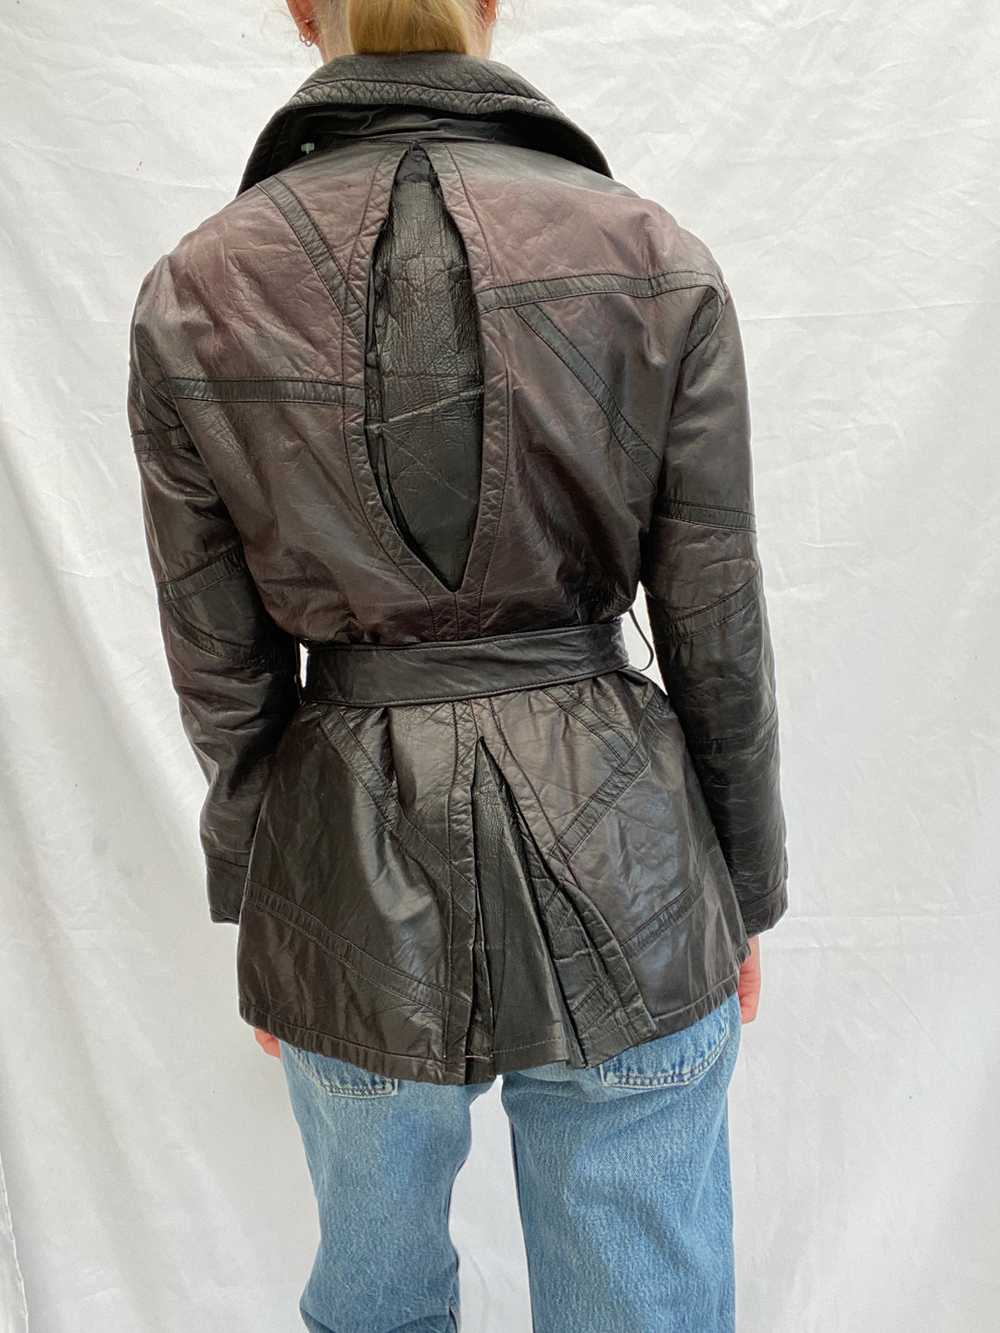 Dark Brown 70's Leather Jacket with Tie - image 7